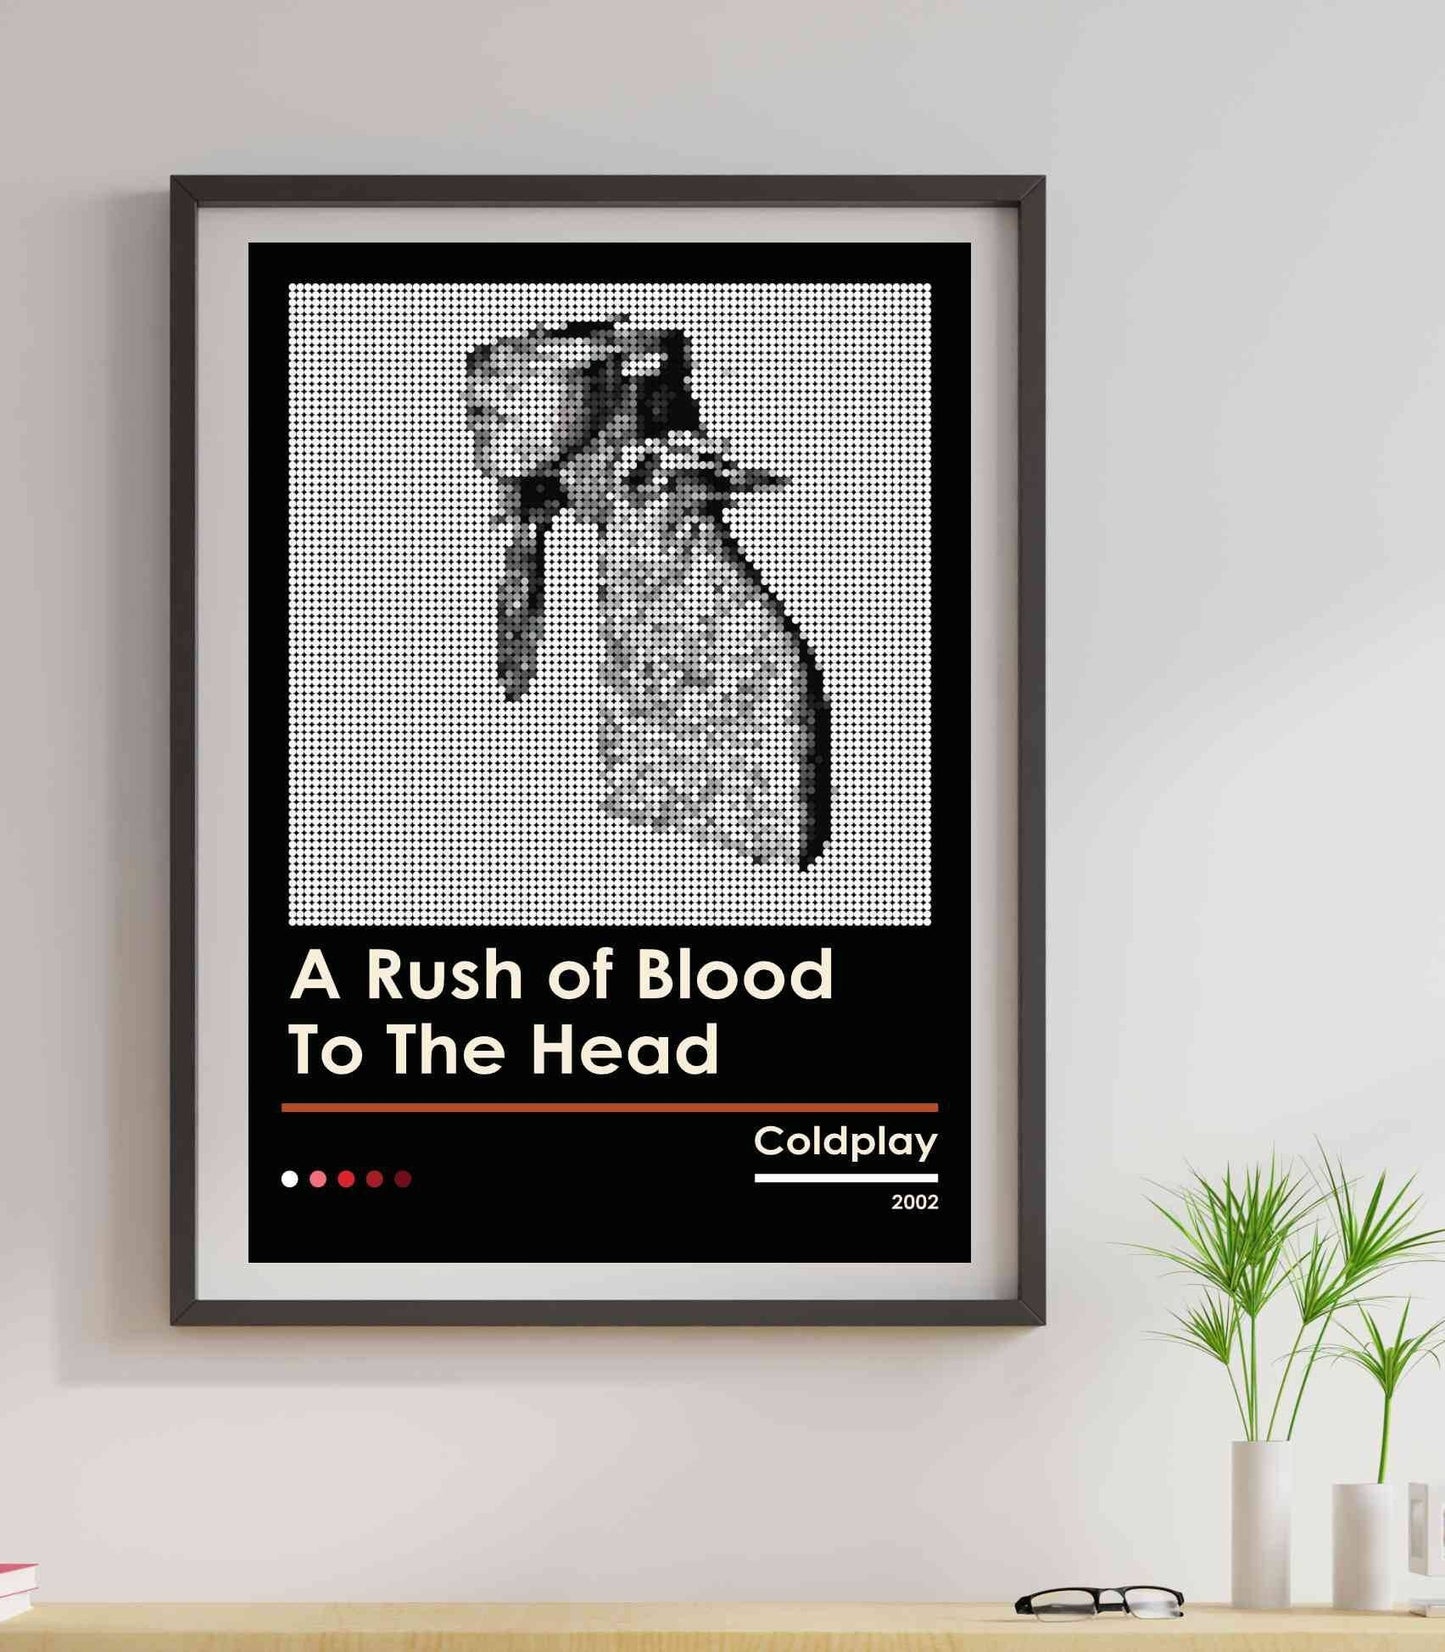 Coldplay A Rush of Blood to the Head Album Poster